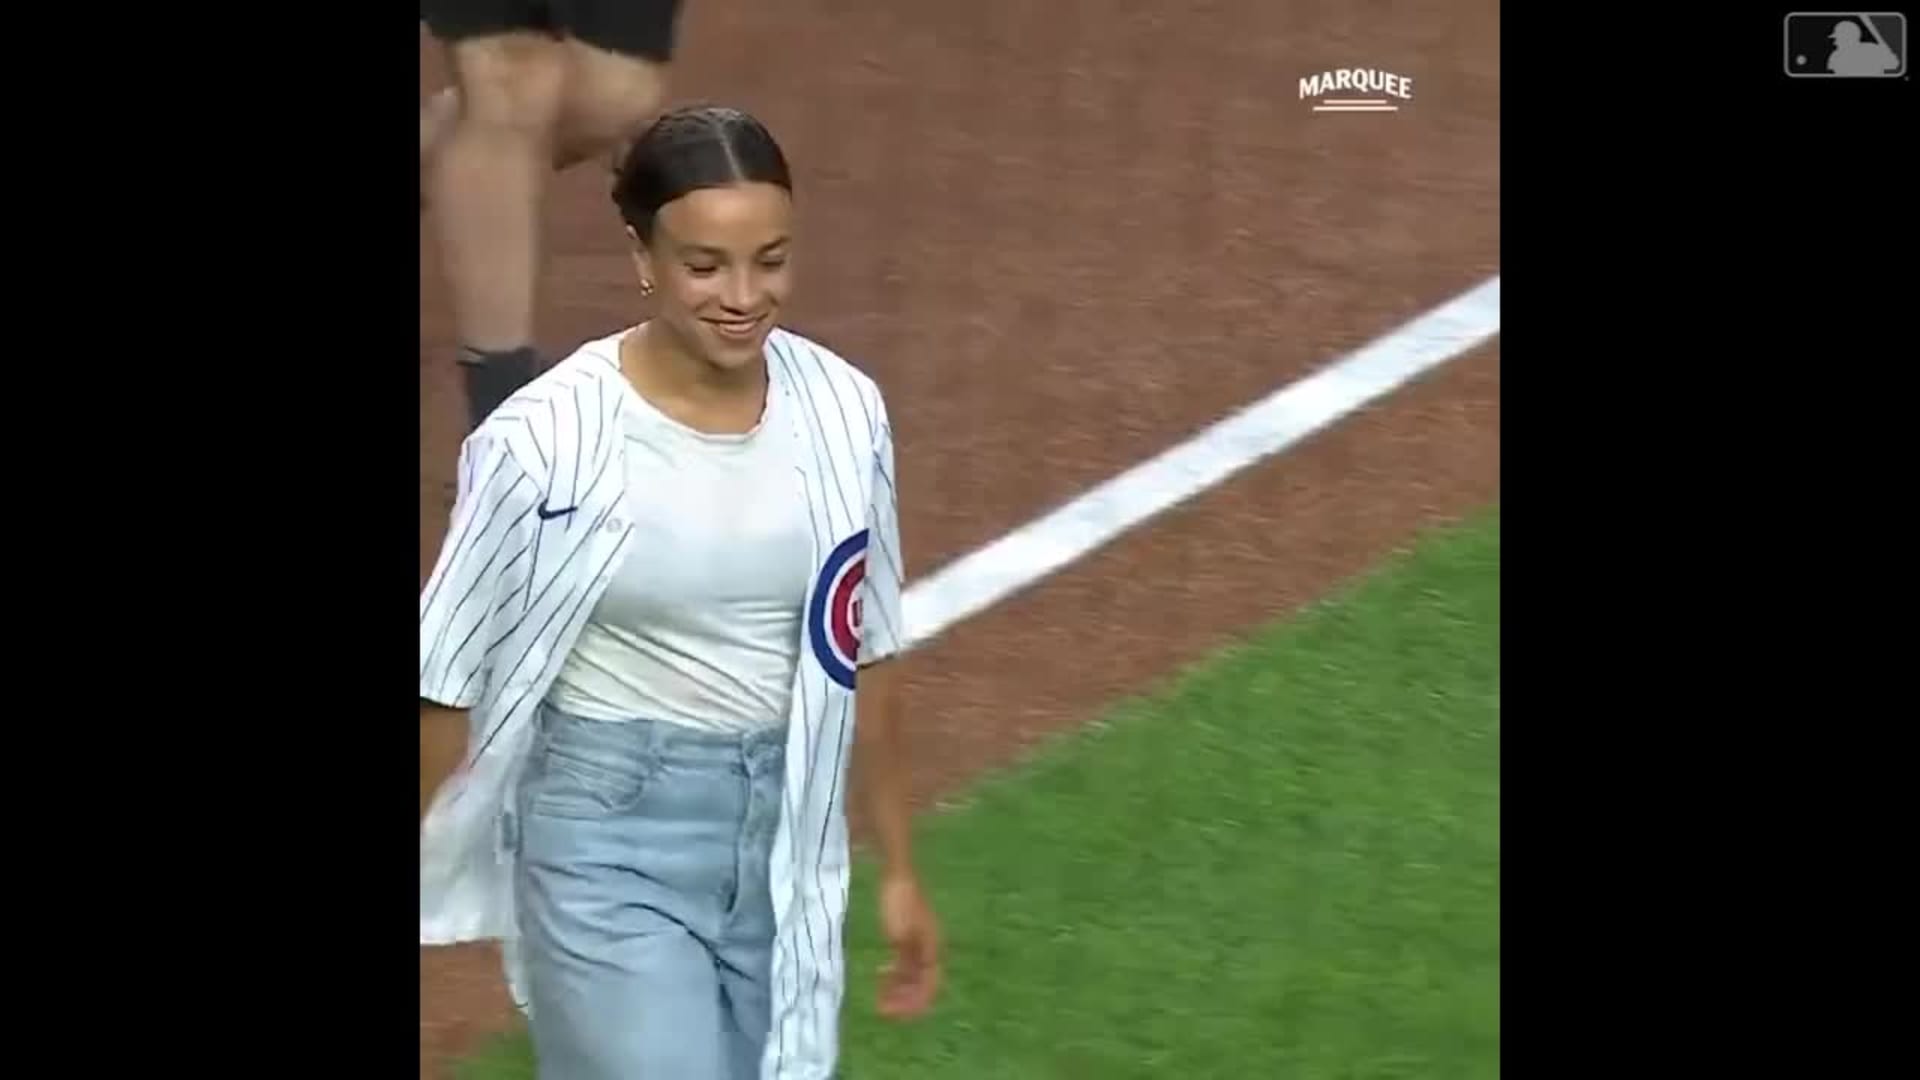 MLB Stories - Celeb First Pitches